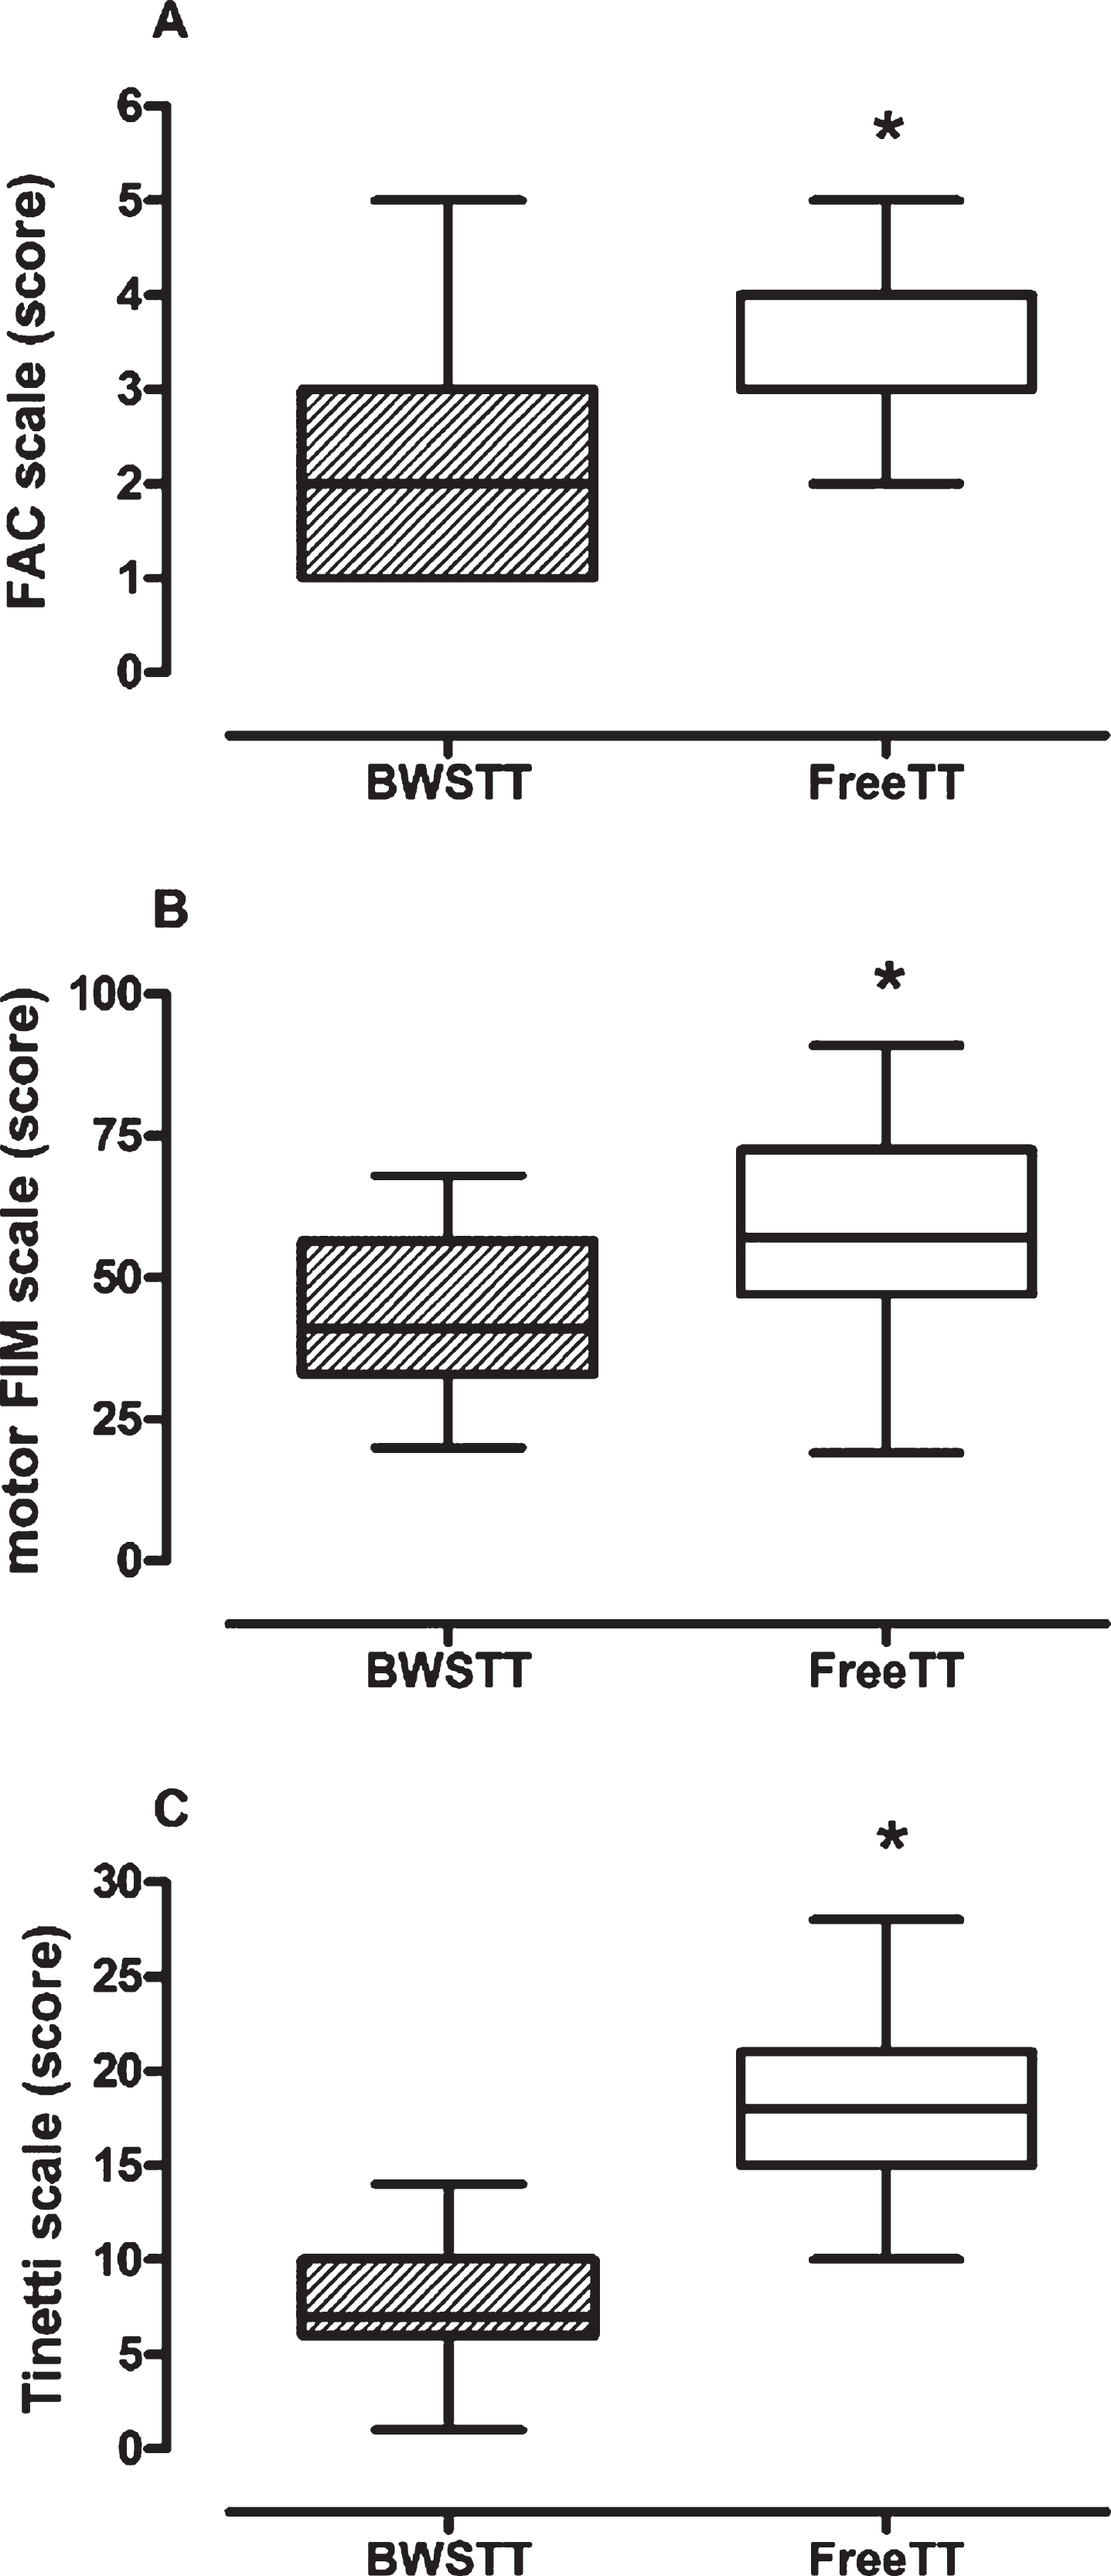 FAC (panel A), Motor FIM (panel B) and Tinetti (panel C) Boxplot of BWSTT vs. FreeTT group. For the three scales higher score values indicate higher functioning. Legend:FreeTT = Free treadmill training; BWSTT = Body weight support treadmill training; FAC = Functional Ambulation Classification; FIM = Functional Independence Measure; Tinetti = Tinetti Performance-Oriented Mobility Assessment A + B component.*p < 0.0001.